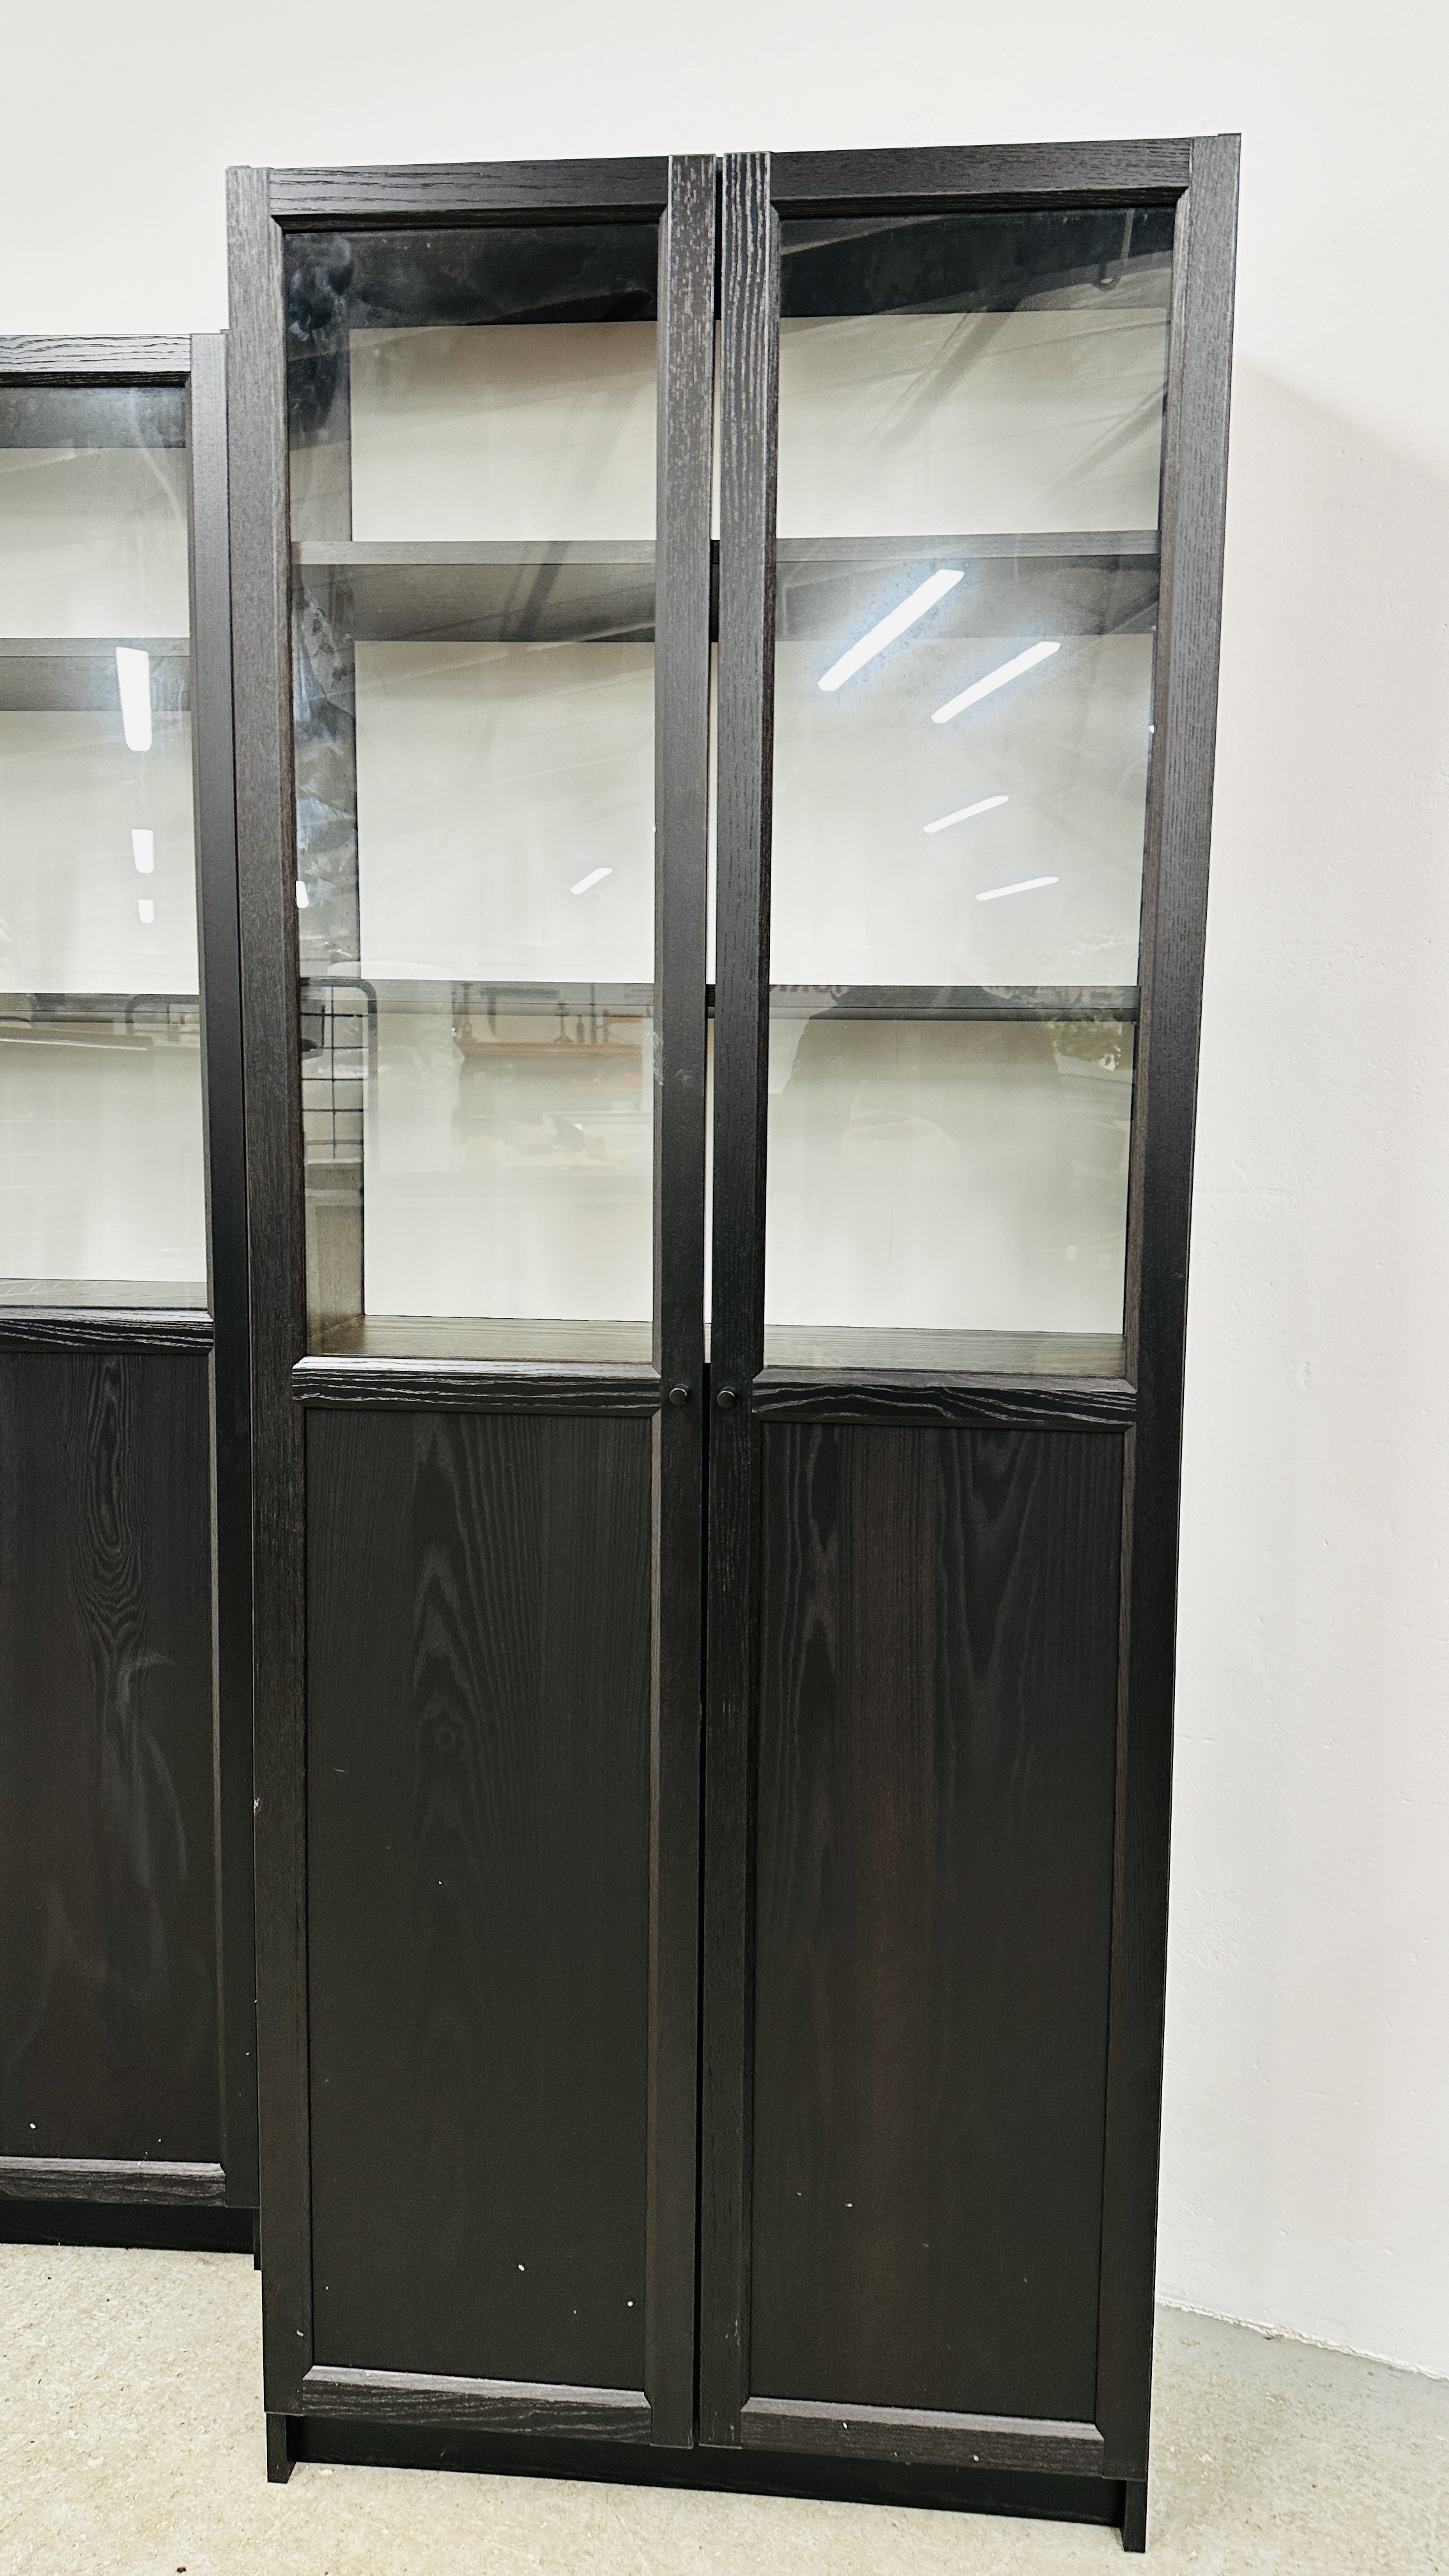 2 X MODERN BLACK ASH EFFECT FINISH FULL HEIGHT WALL CABINETS WITH GLAZED TOPS EACH W 80CM, D 30CM, - Image 2 of 8